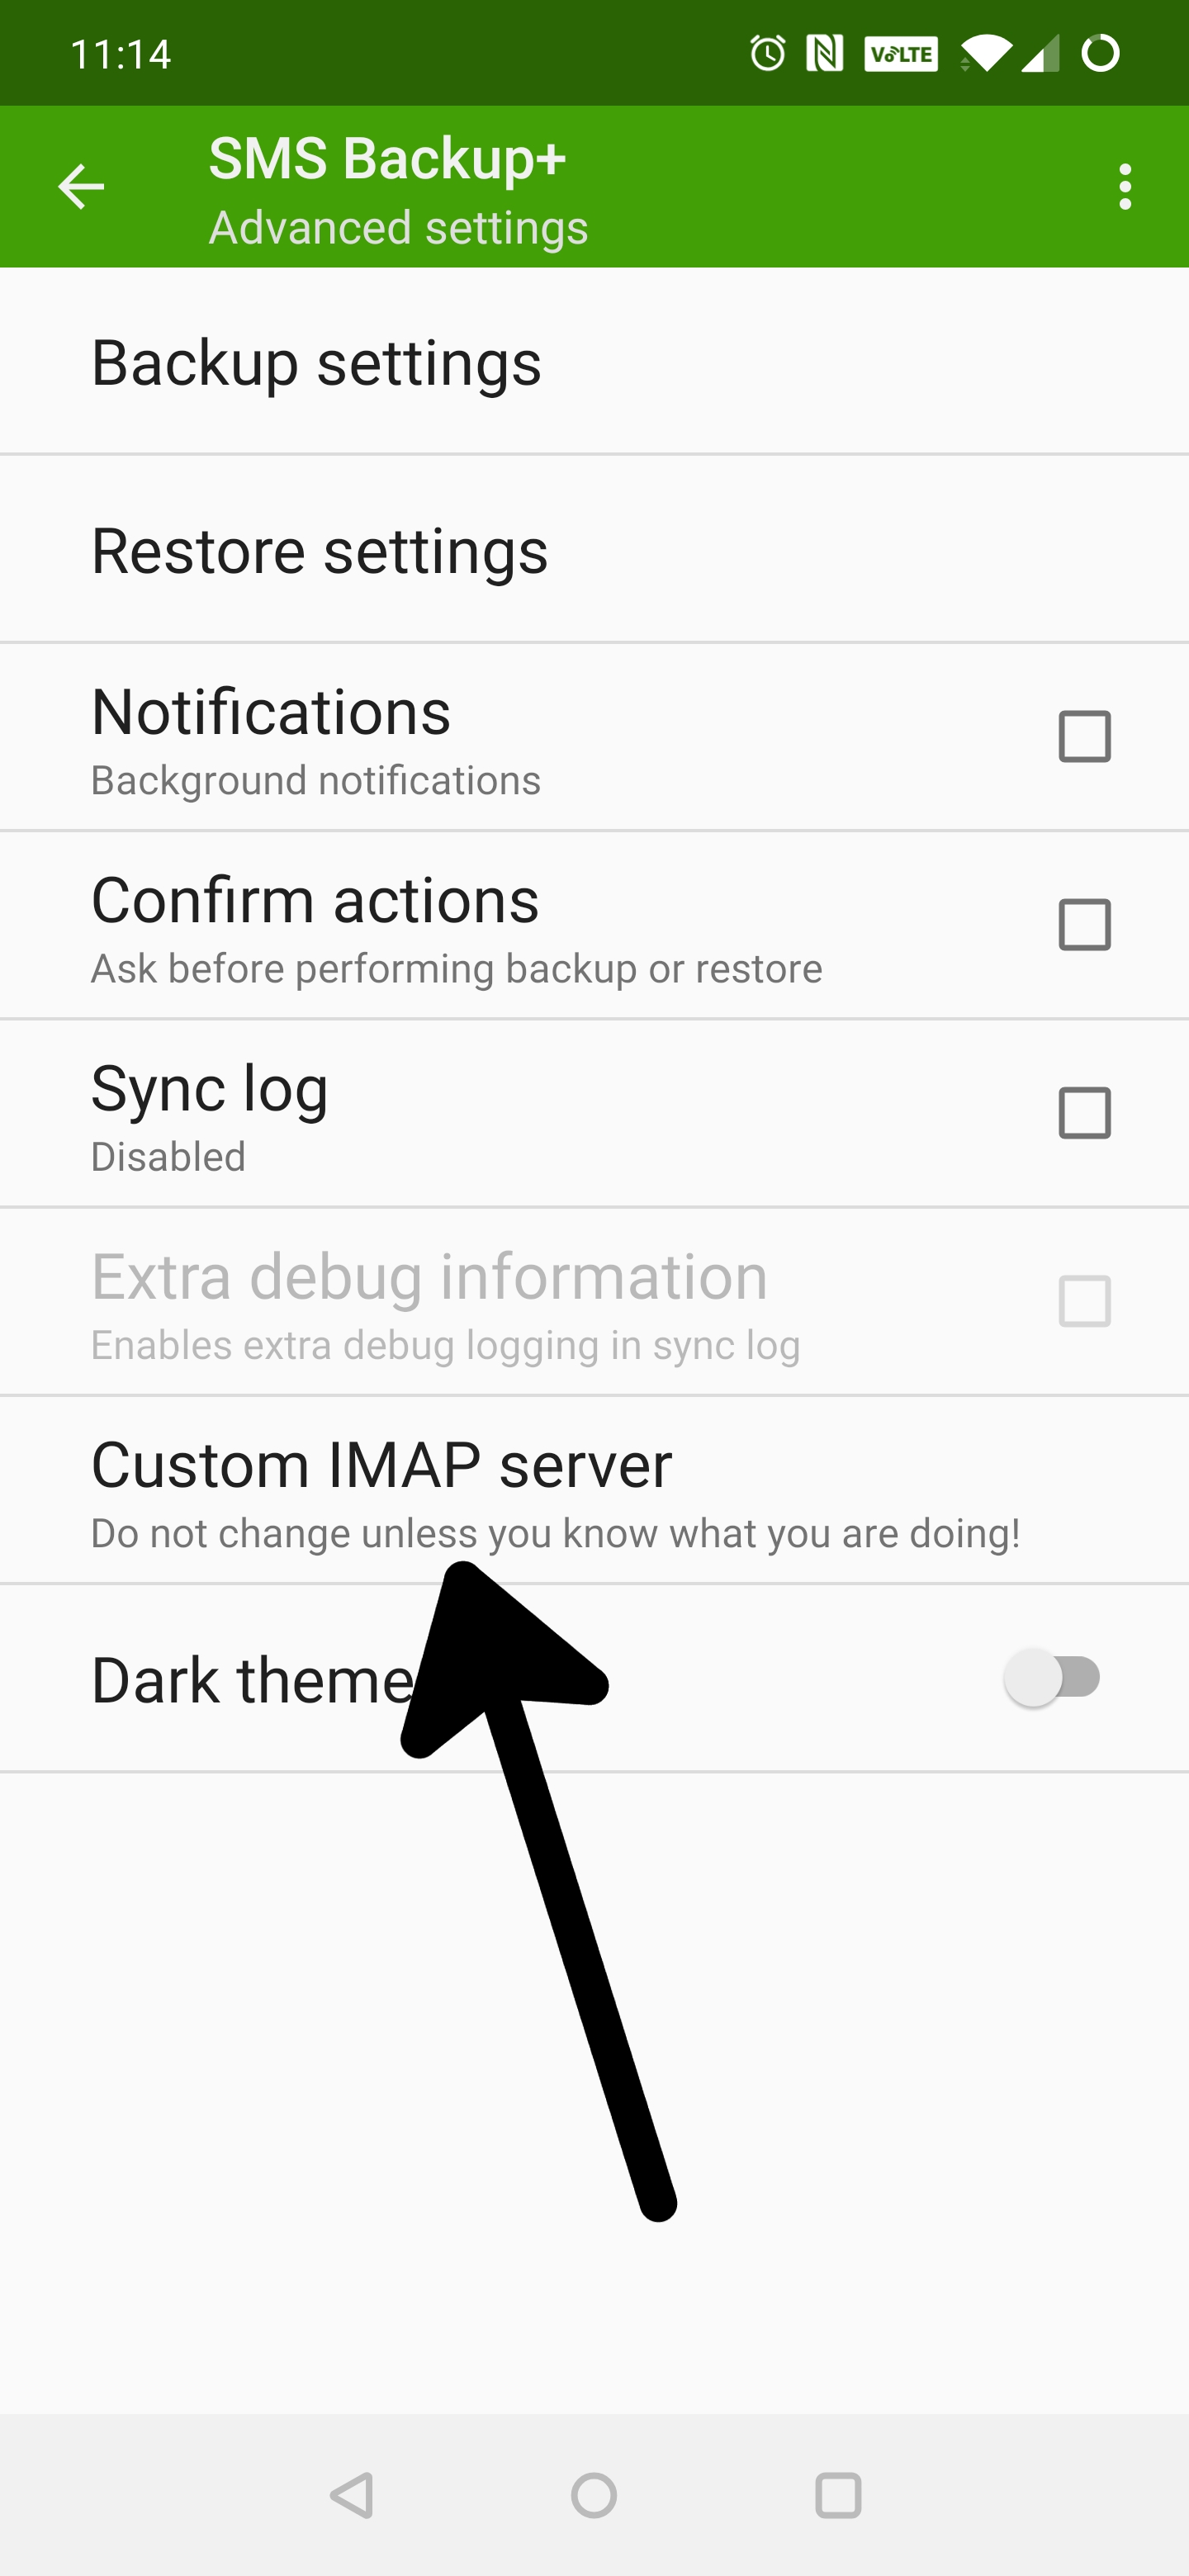 can i make sms backup app backup from computer